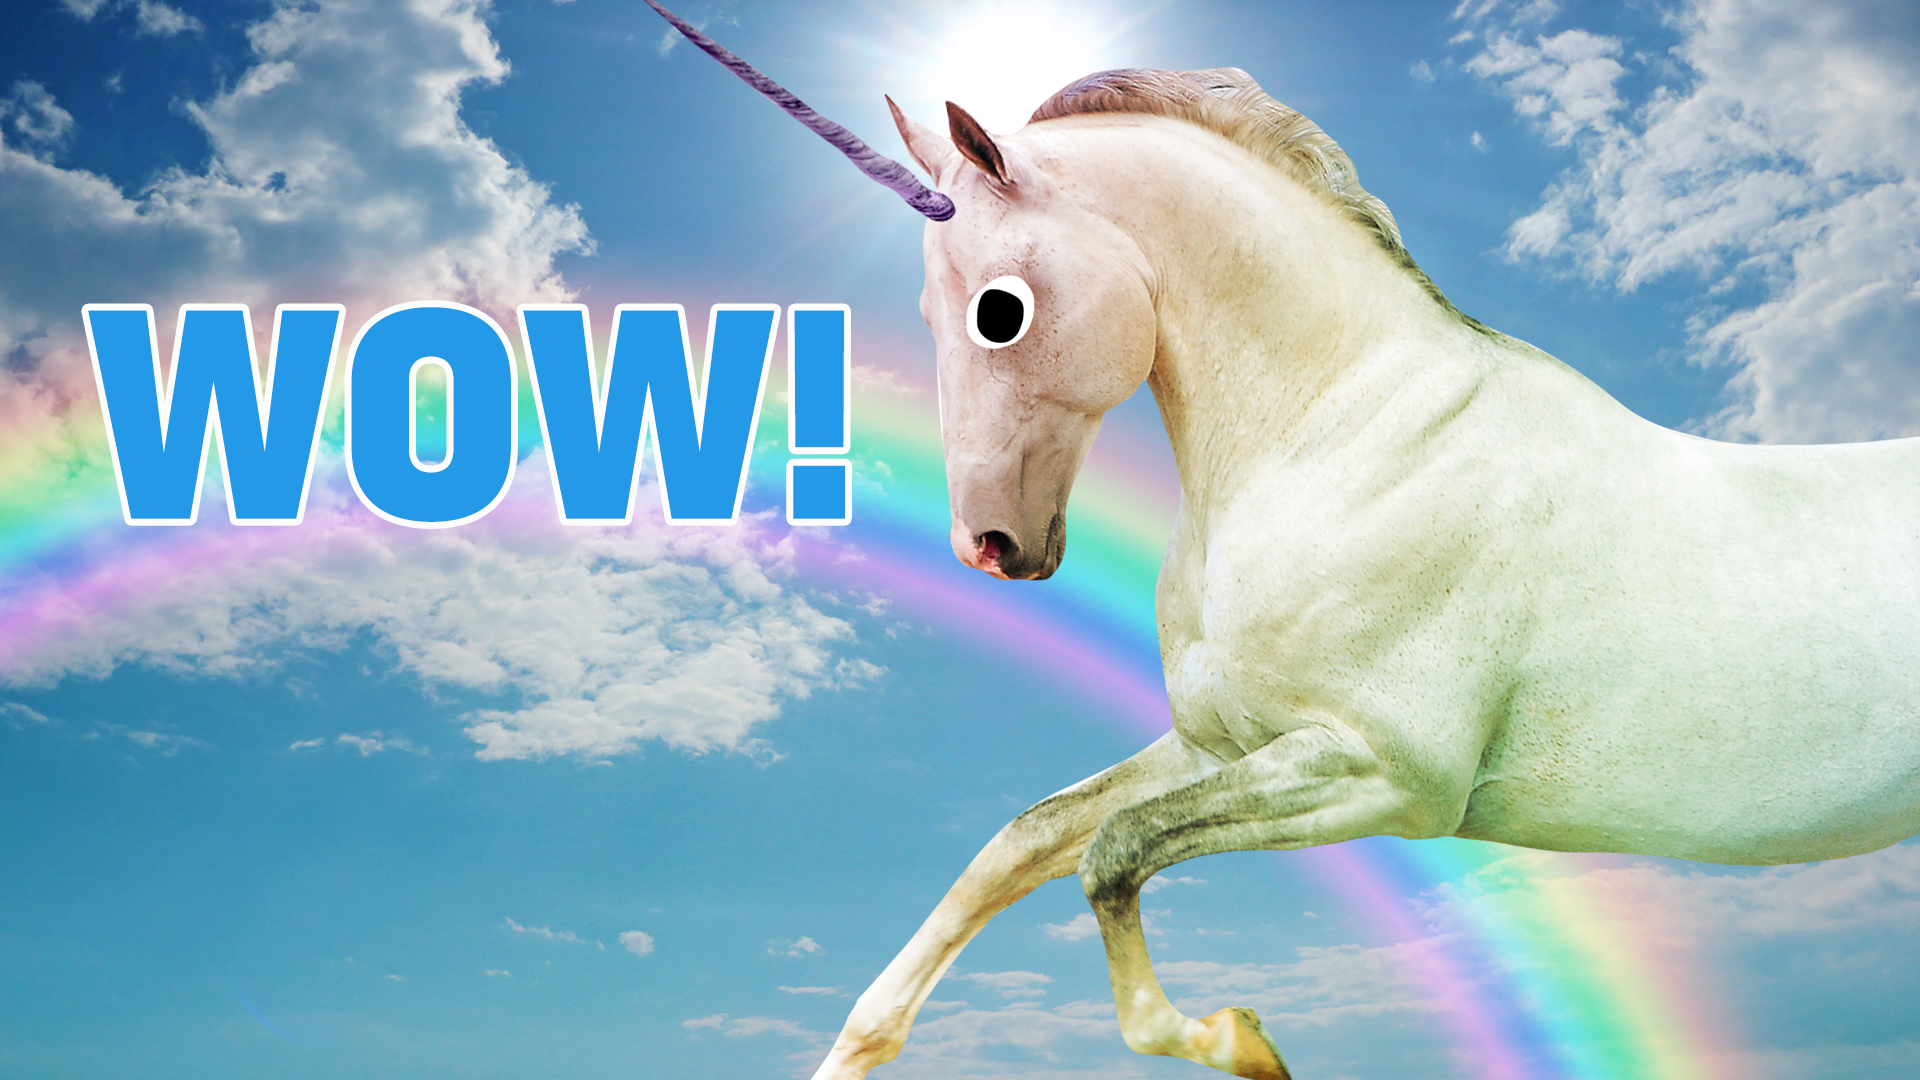 Incredible! You're officially the most knowledgeable Unicorn Academy reader in the world, because you got 100%! Congrats!